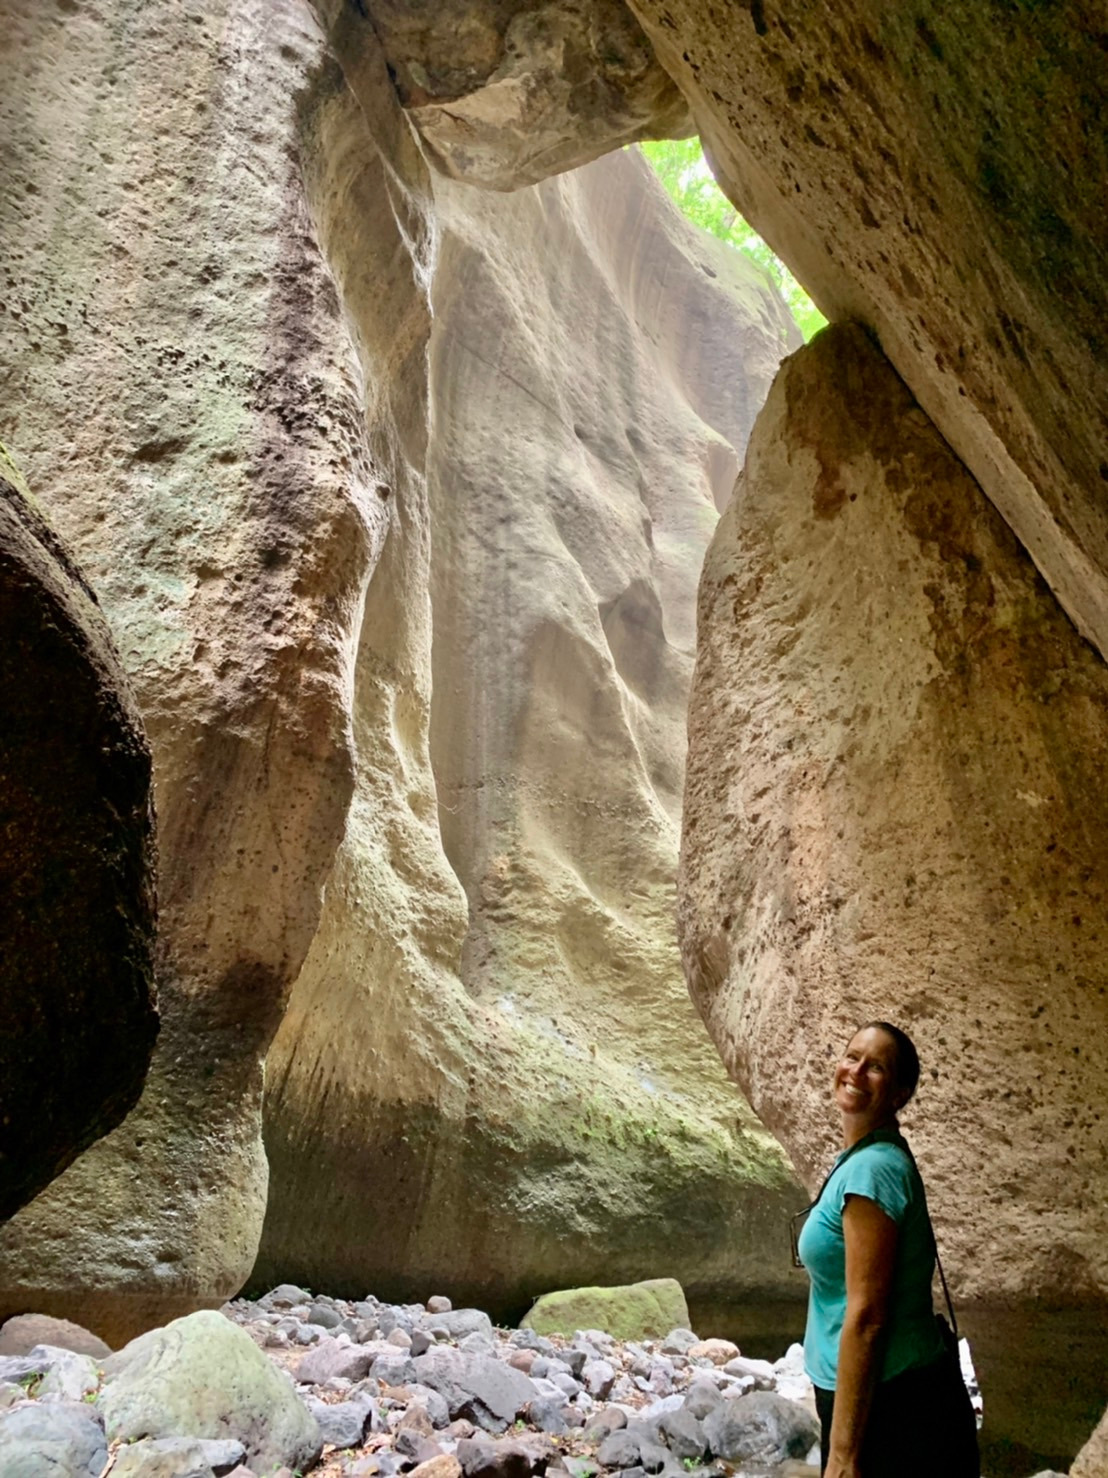 There are three alleys from where to admire the natural environment surrounding the river; the caves that are home to parakeets, and the magnificent shapes of the natural pathways.